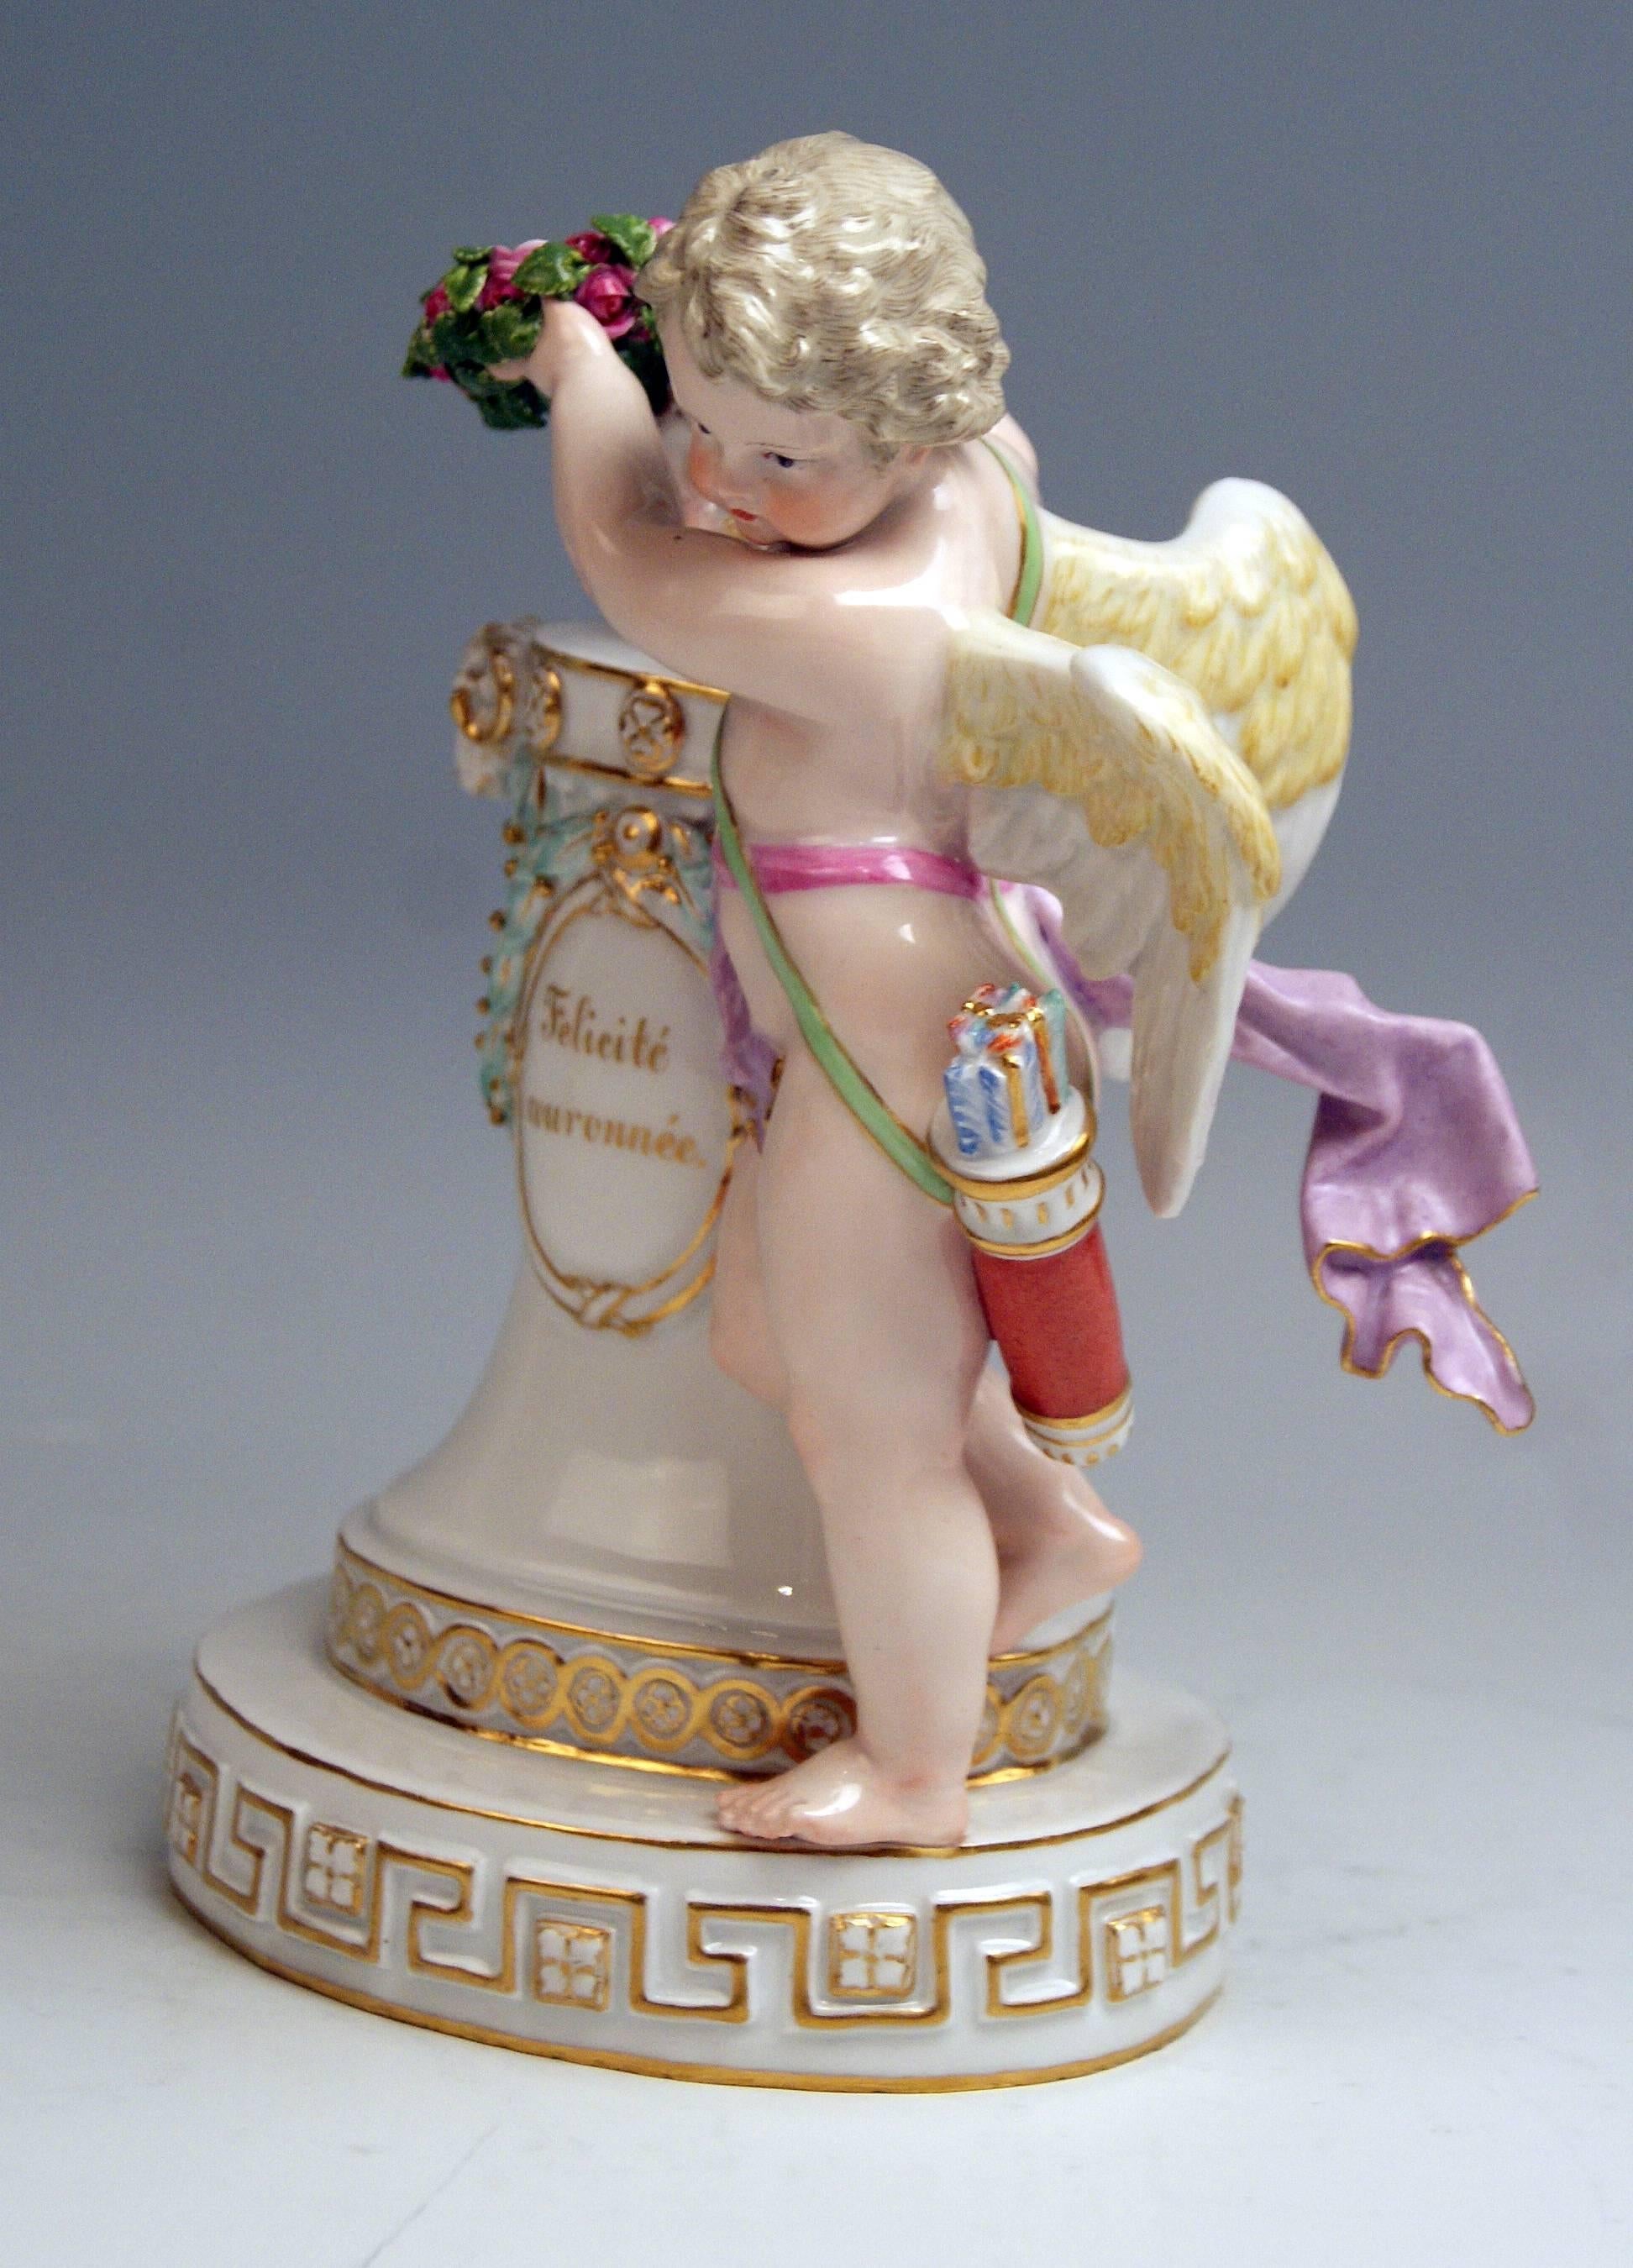 Meissen Stunning Figurine:
Cherub Amor with wreath of rose flowers' blossoms 

Measures:
Height: 7.87 inches 
Width: 6.49 inches
Depth: 3.93 inches

Manufactory: Meissen
Hallmarked: Blue Meissen Sword Mark (glazed bottom)
It is model E 82